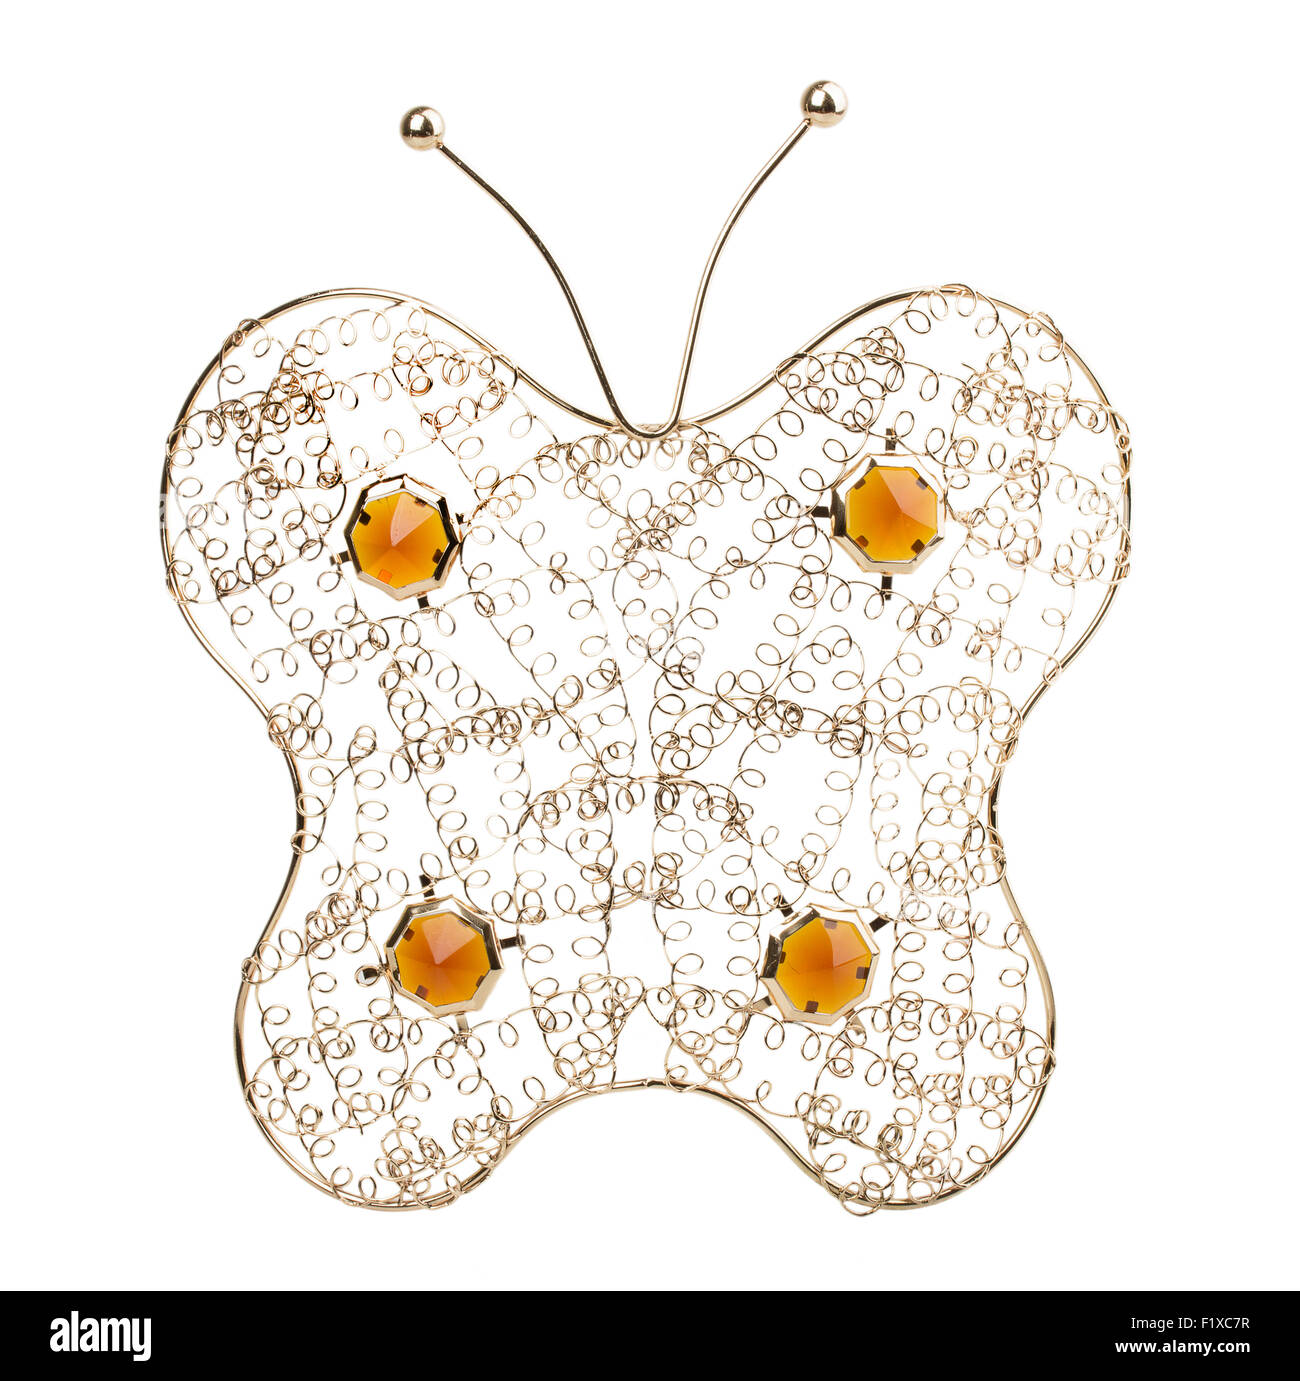 gold filigree butterfly on a white background. Stock Photo